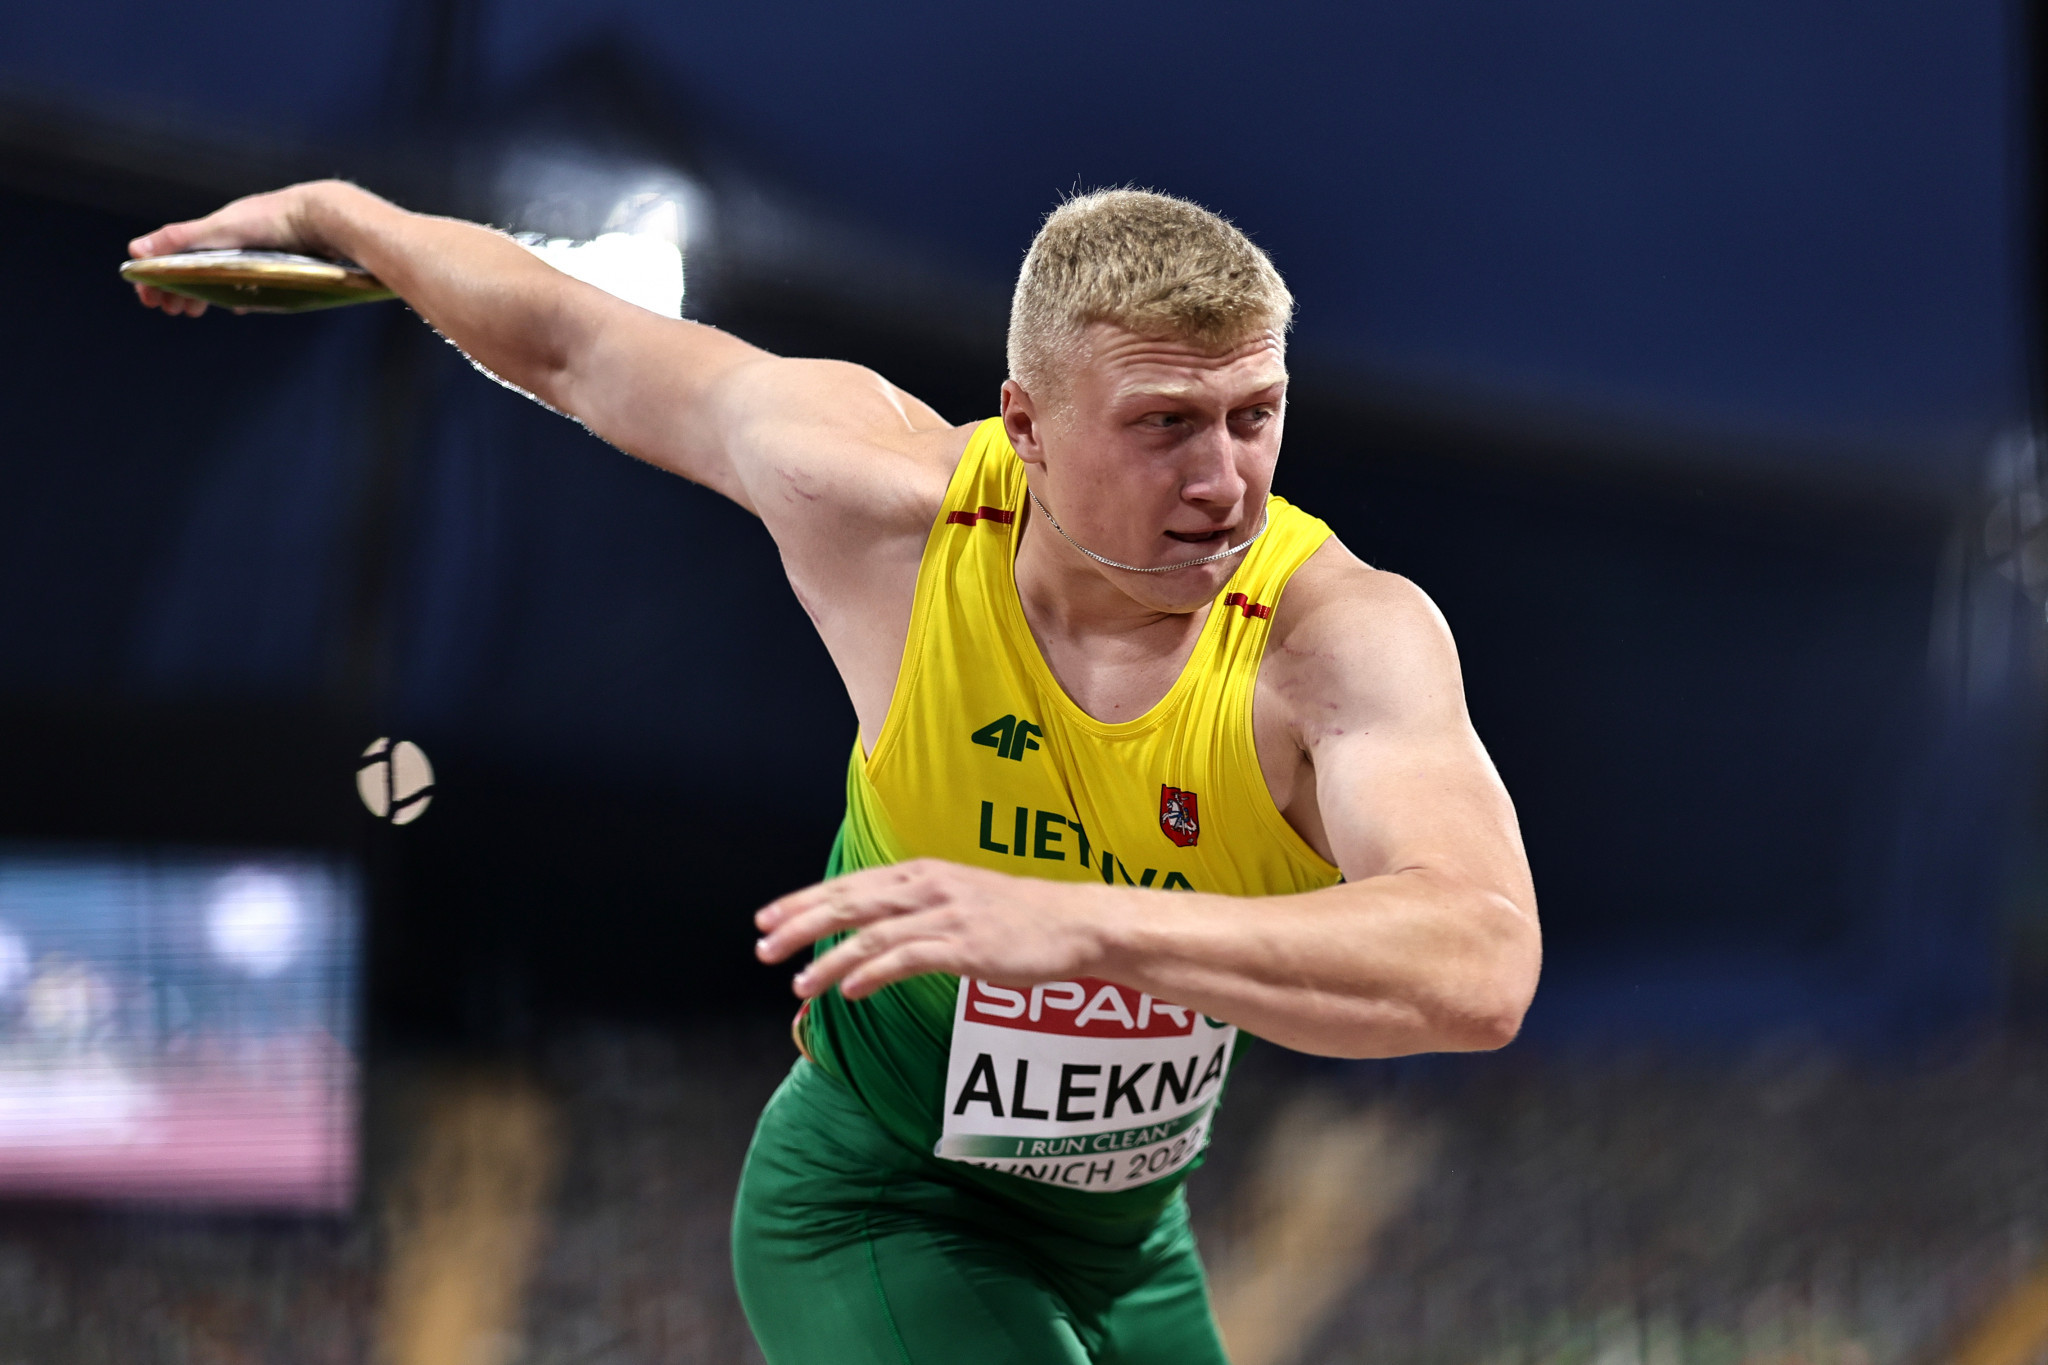 A Championships record of 69.78m was also set in the men's discus throw final by Lithuania's Mykolas Alekna ©Getty Images